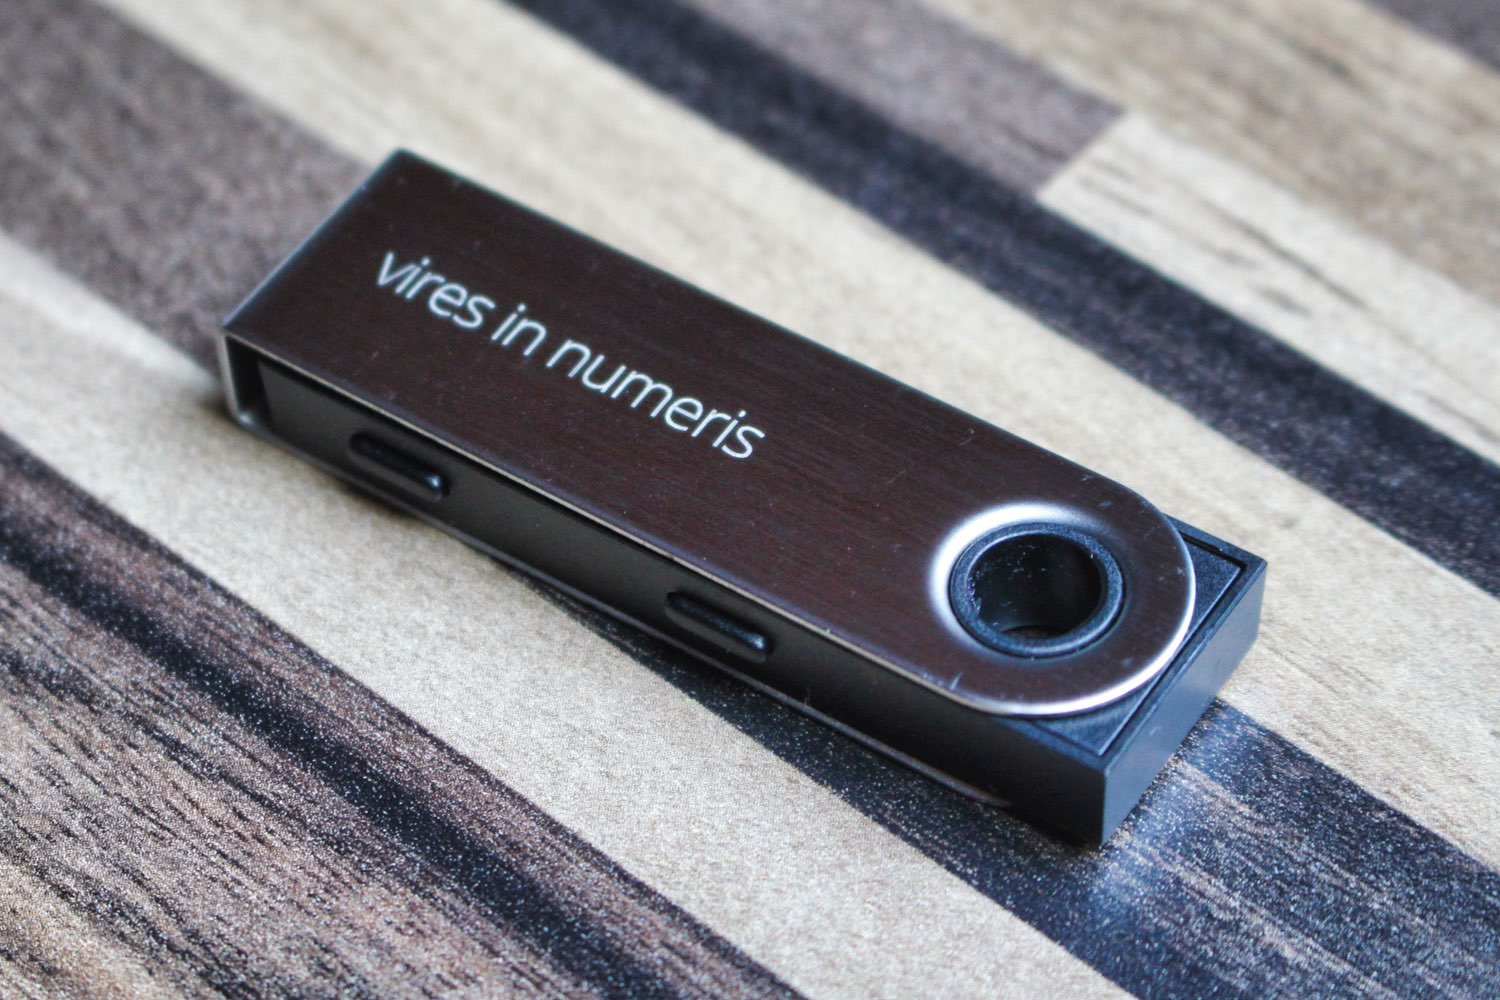 It’s perfectly fine to see “Vires in Numeris” message on Ledger Nano S